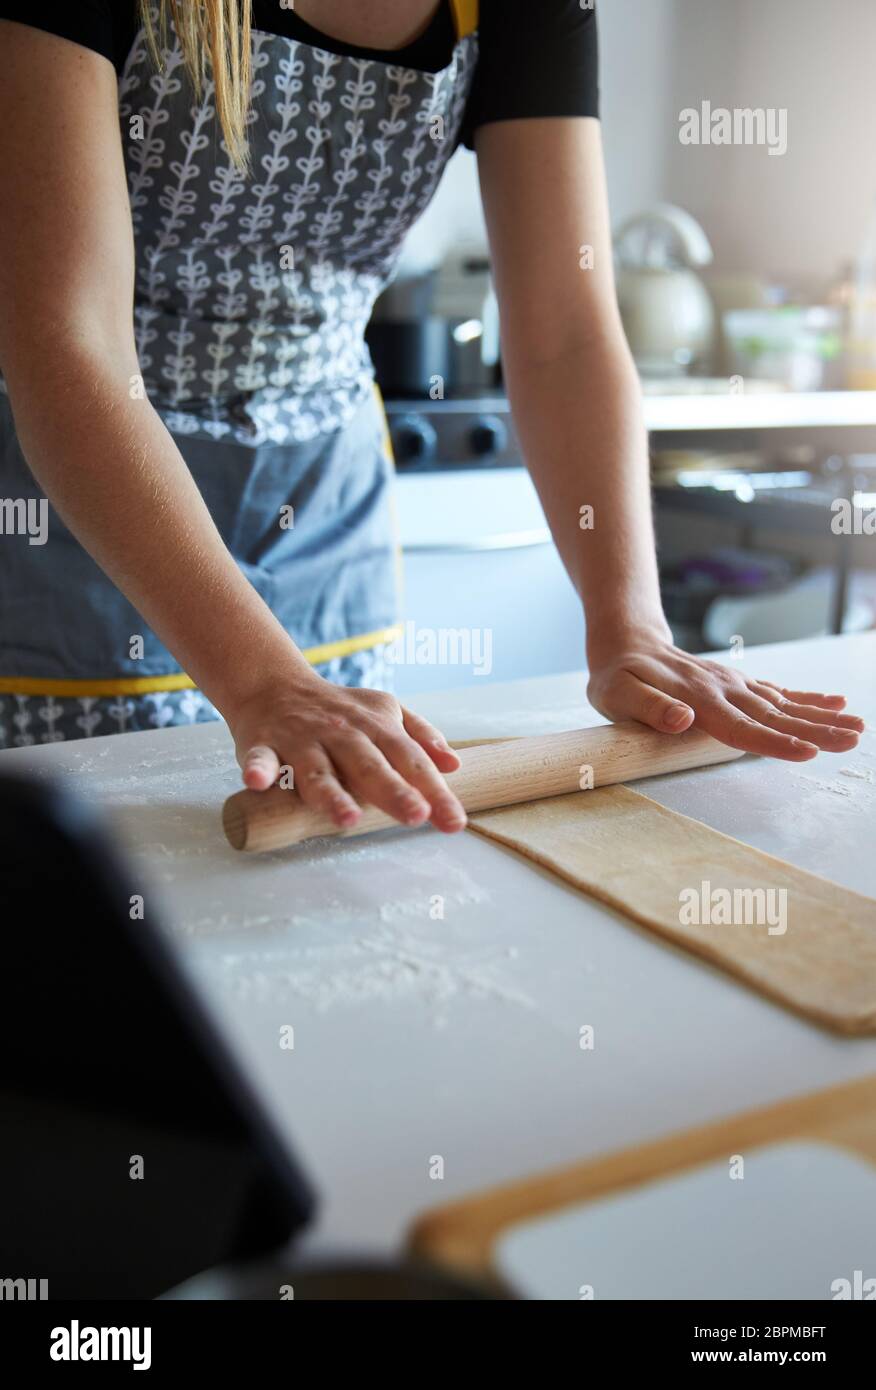 Anonymous person using a rolling pin to make fresh pasta at home. Stock Photo